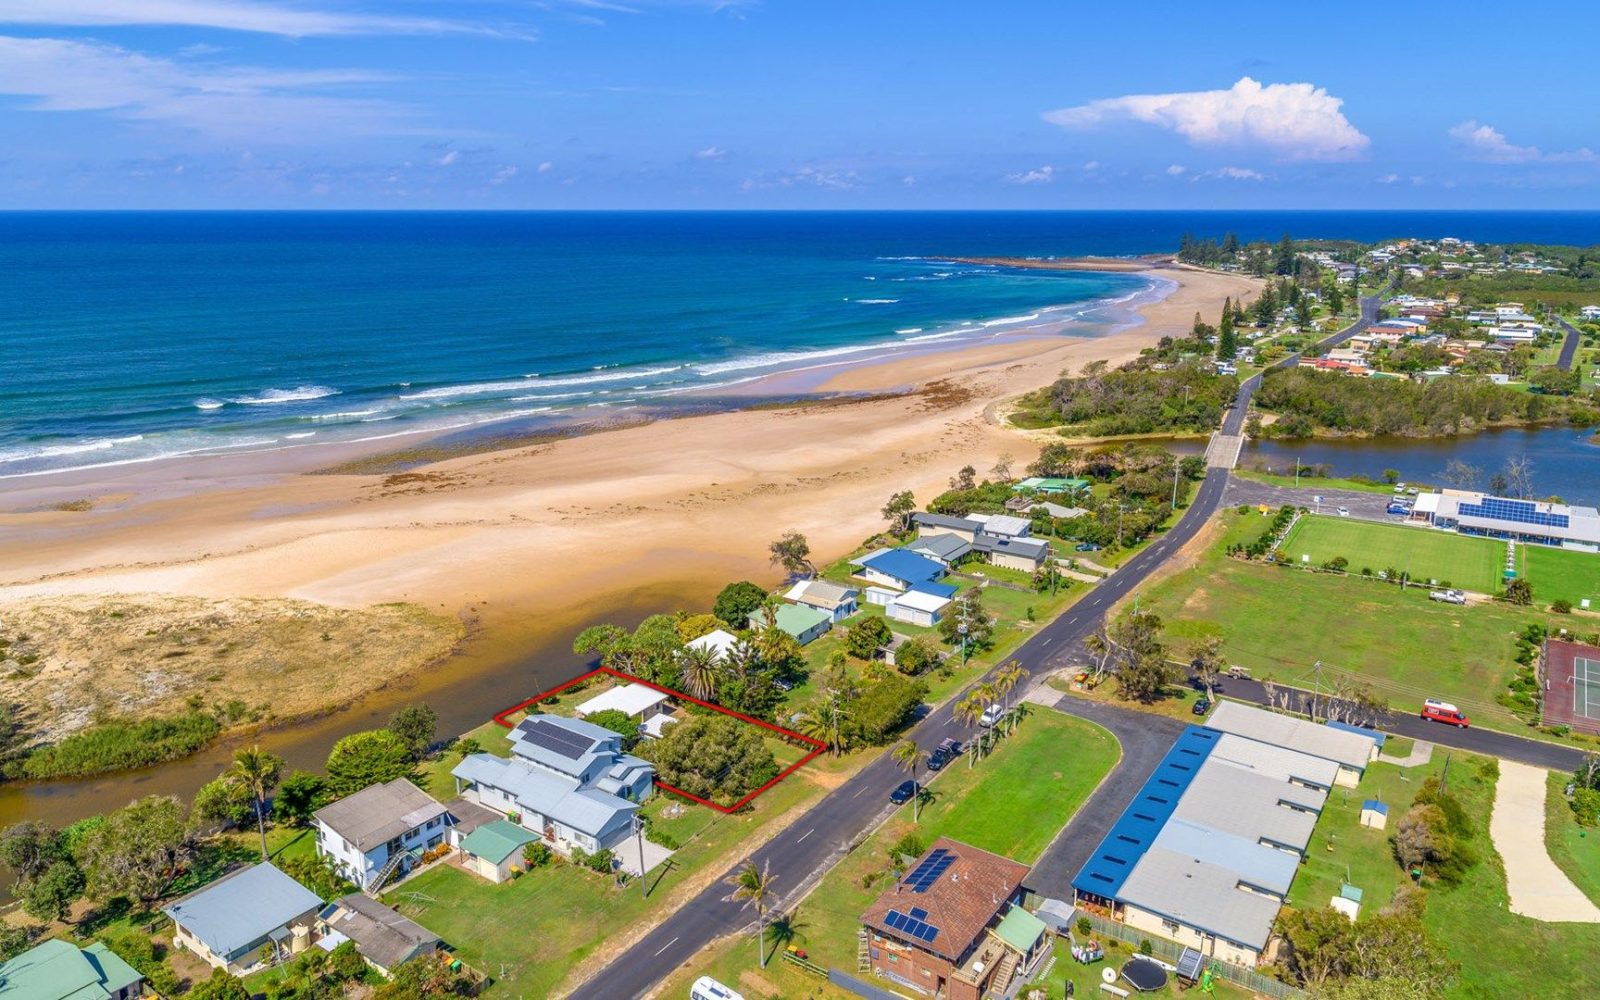 The Brooms Head Bowling Club is situated between the river mouth and the ocean within a pristine national park so it is important to ensure correct buffers from the sewage treatment plant to protect people and the environment.